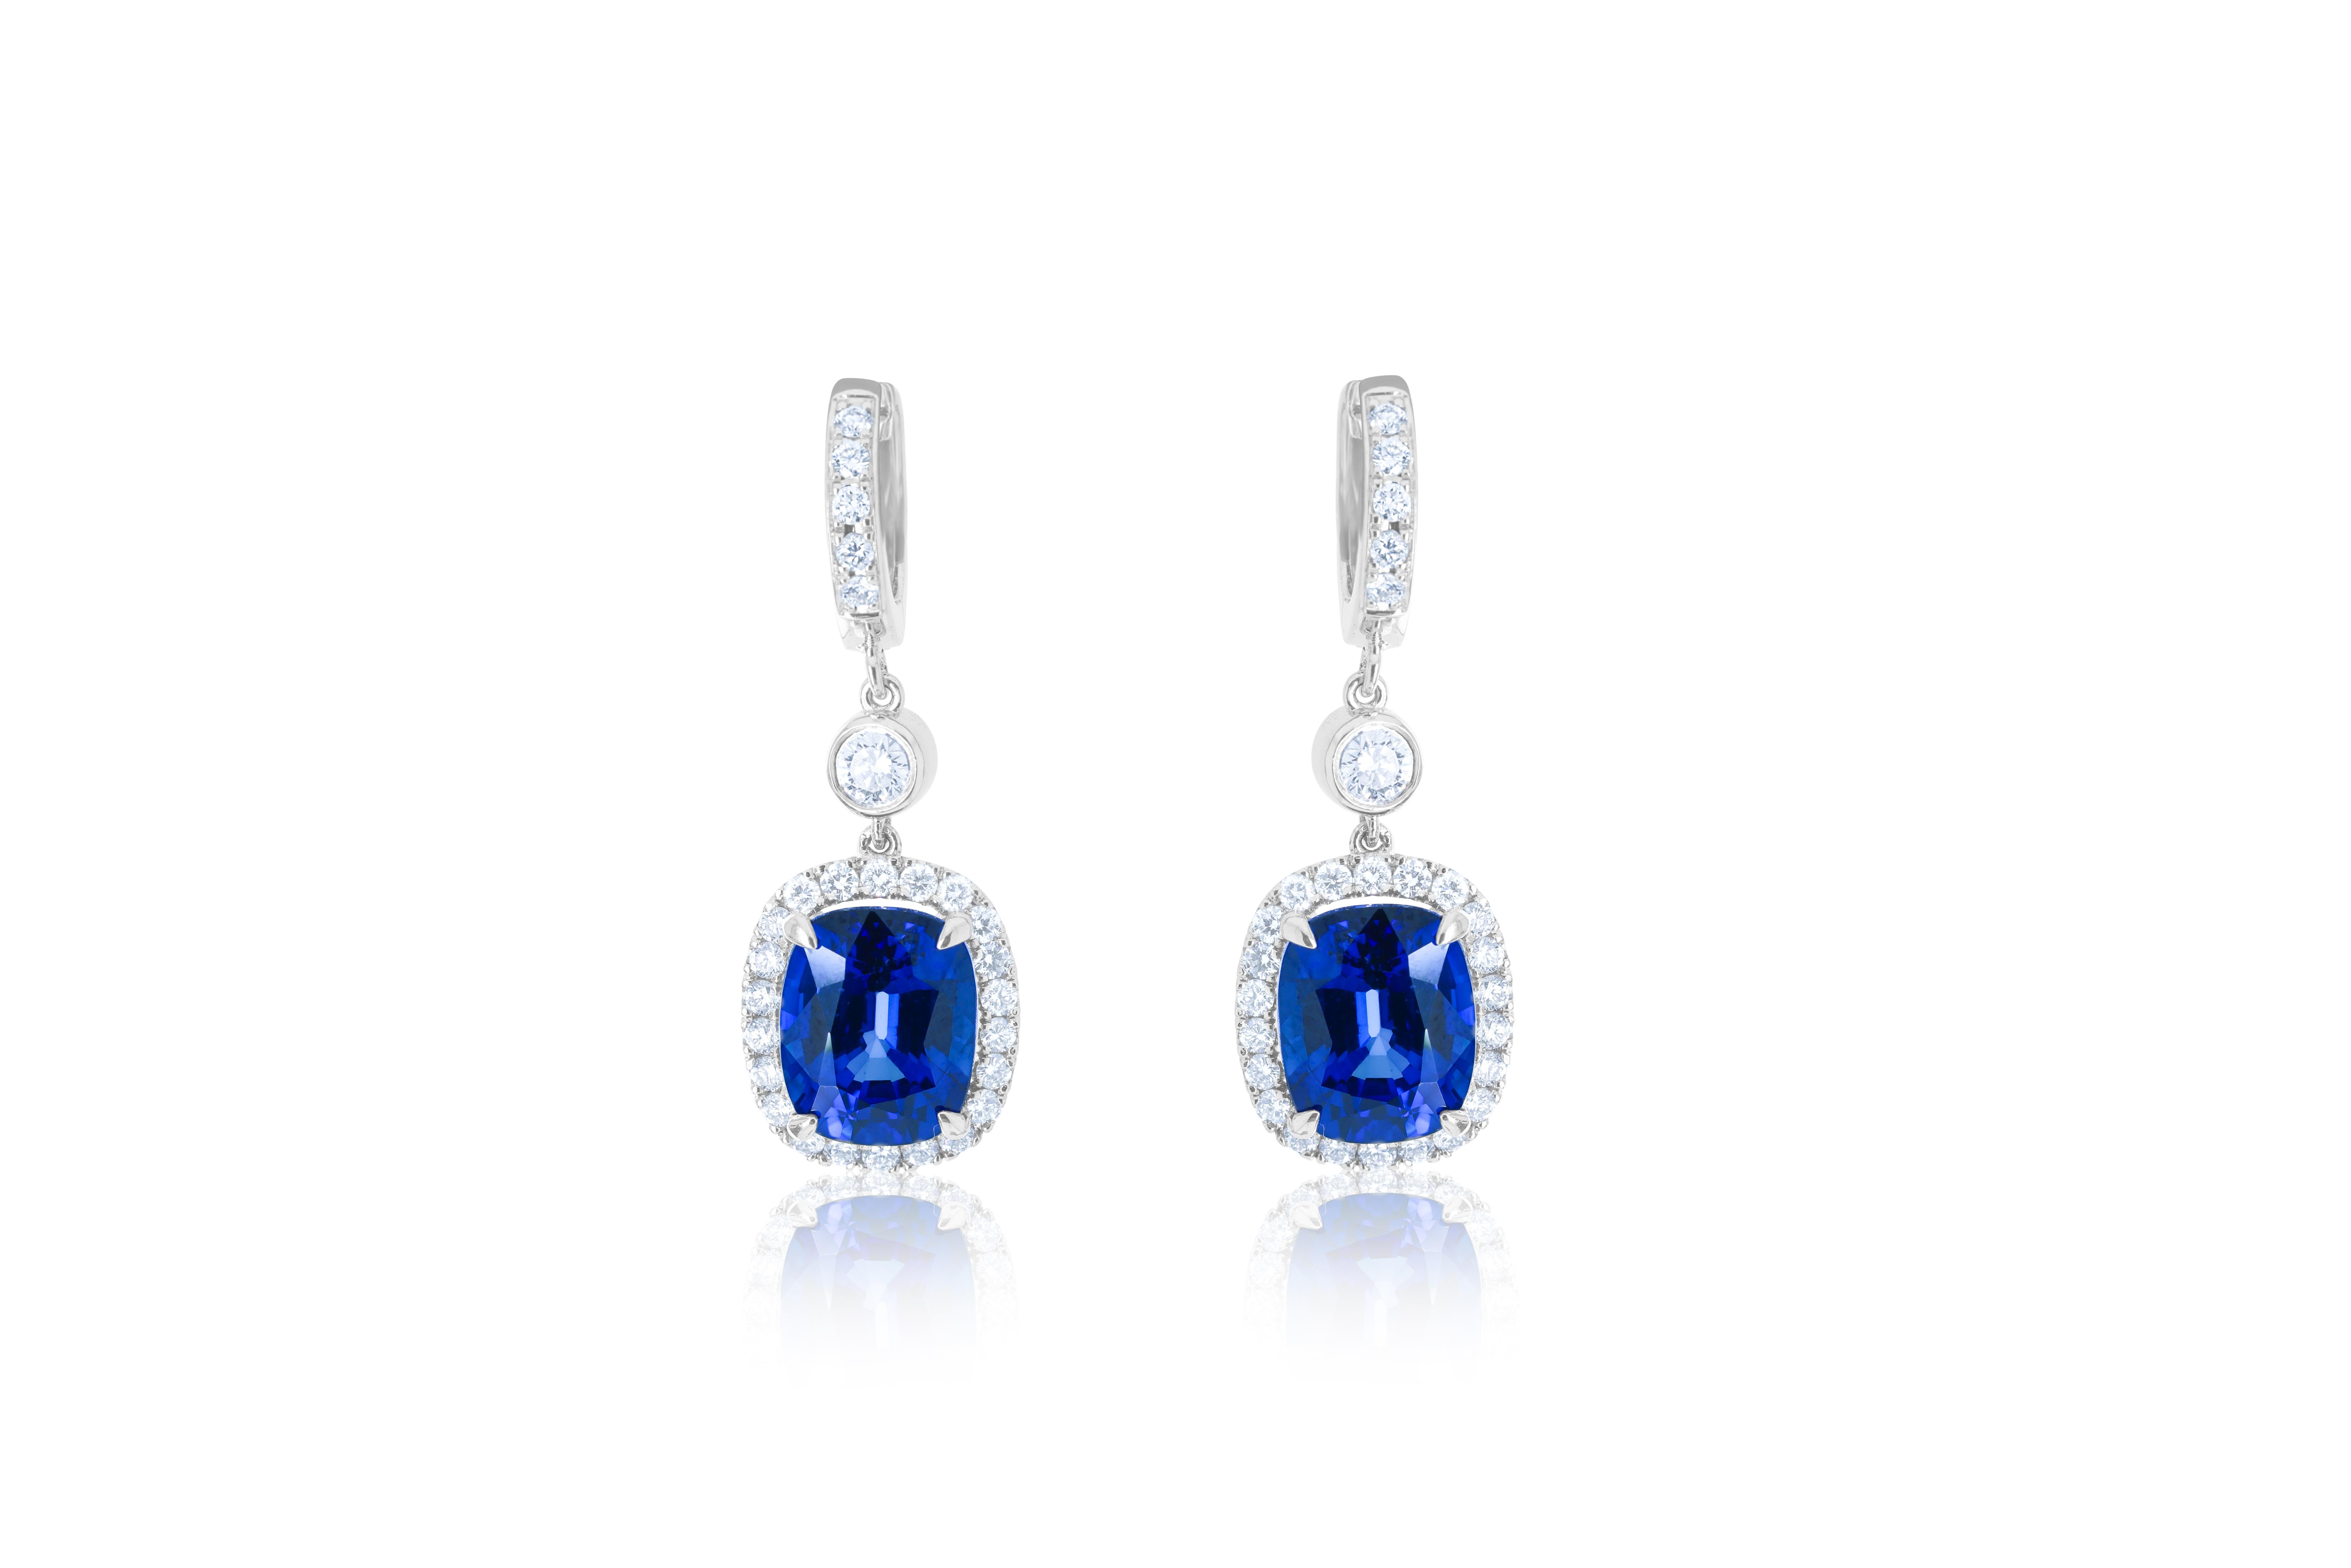 14KT Sapphire Drop Earrings, featuring a magnificent 8.46 carat cushion-cut sapphire corn flower blue color and 1.10cts of halo diamonds .